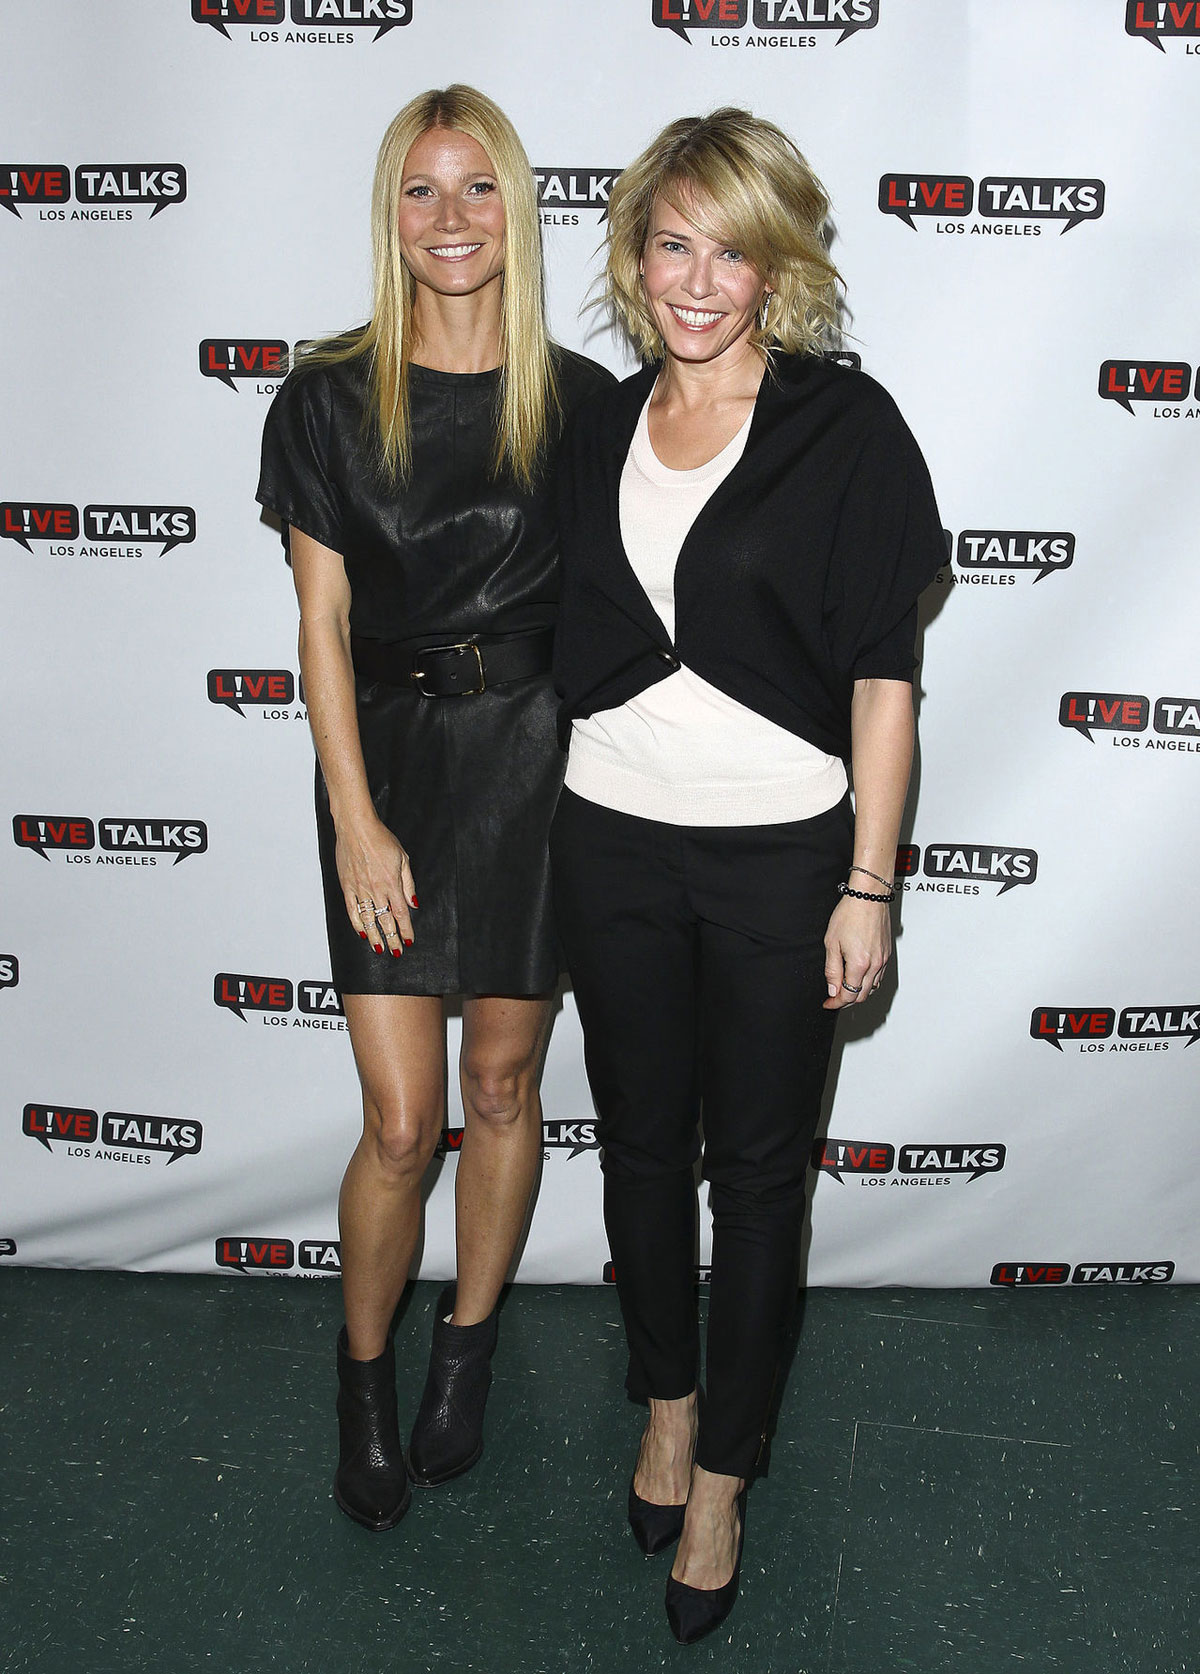 Gwyneth Paltrow poses at the Live Talks Los Angeles